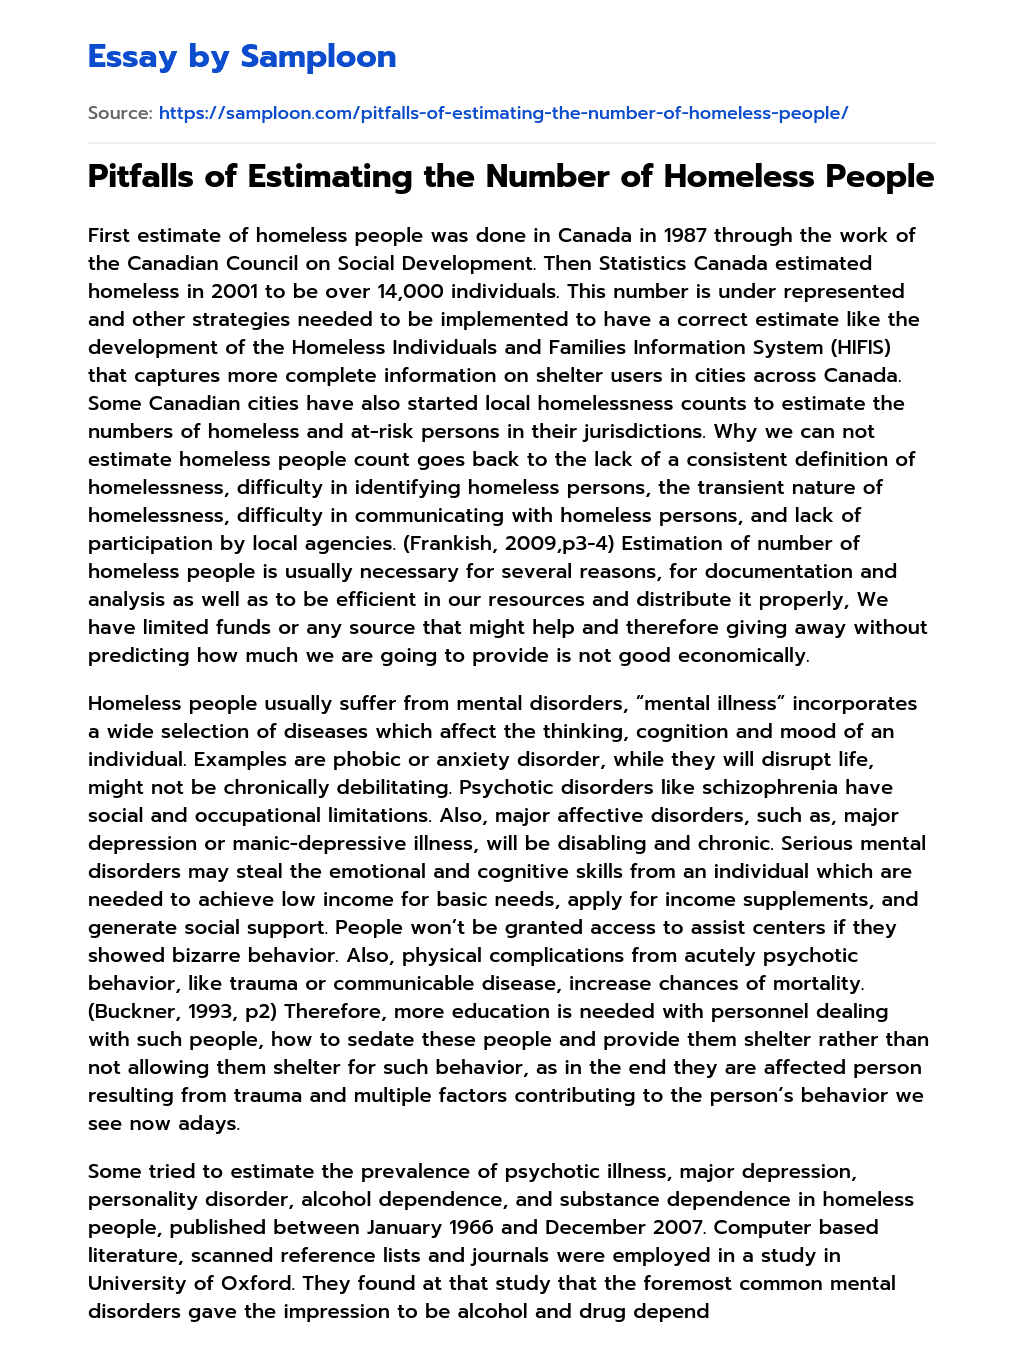 Pitfalls of Estimating the Number of Homeless People essay